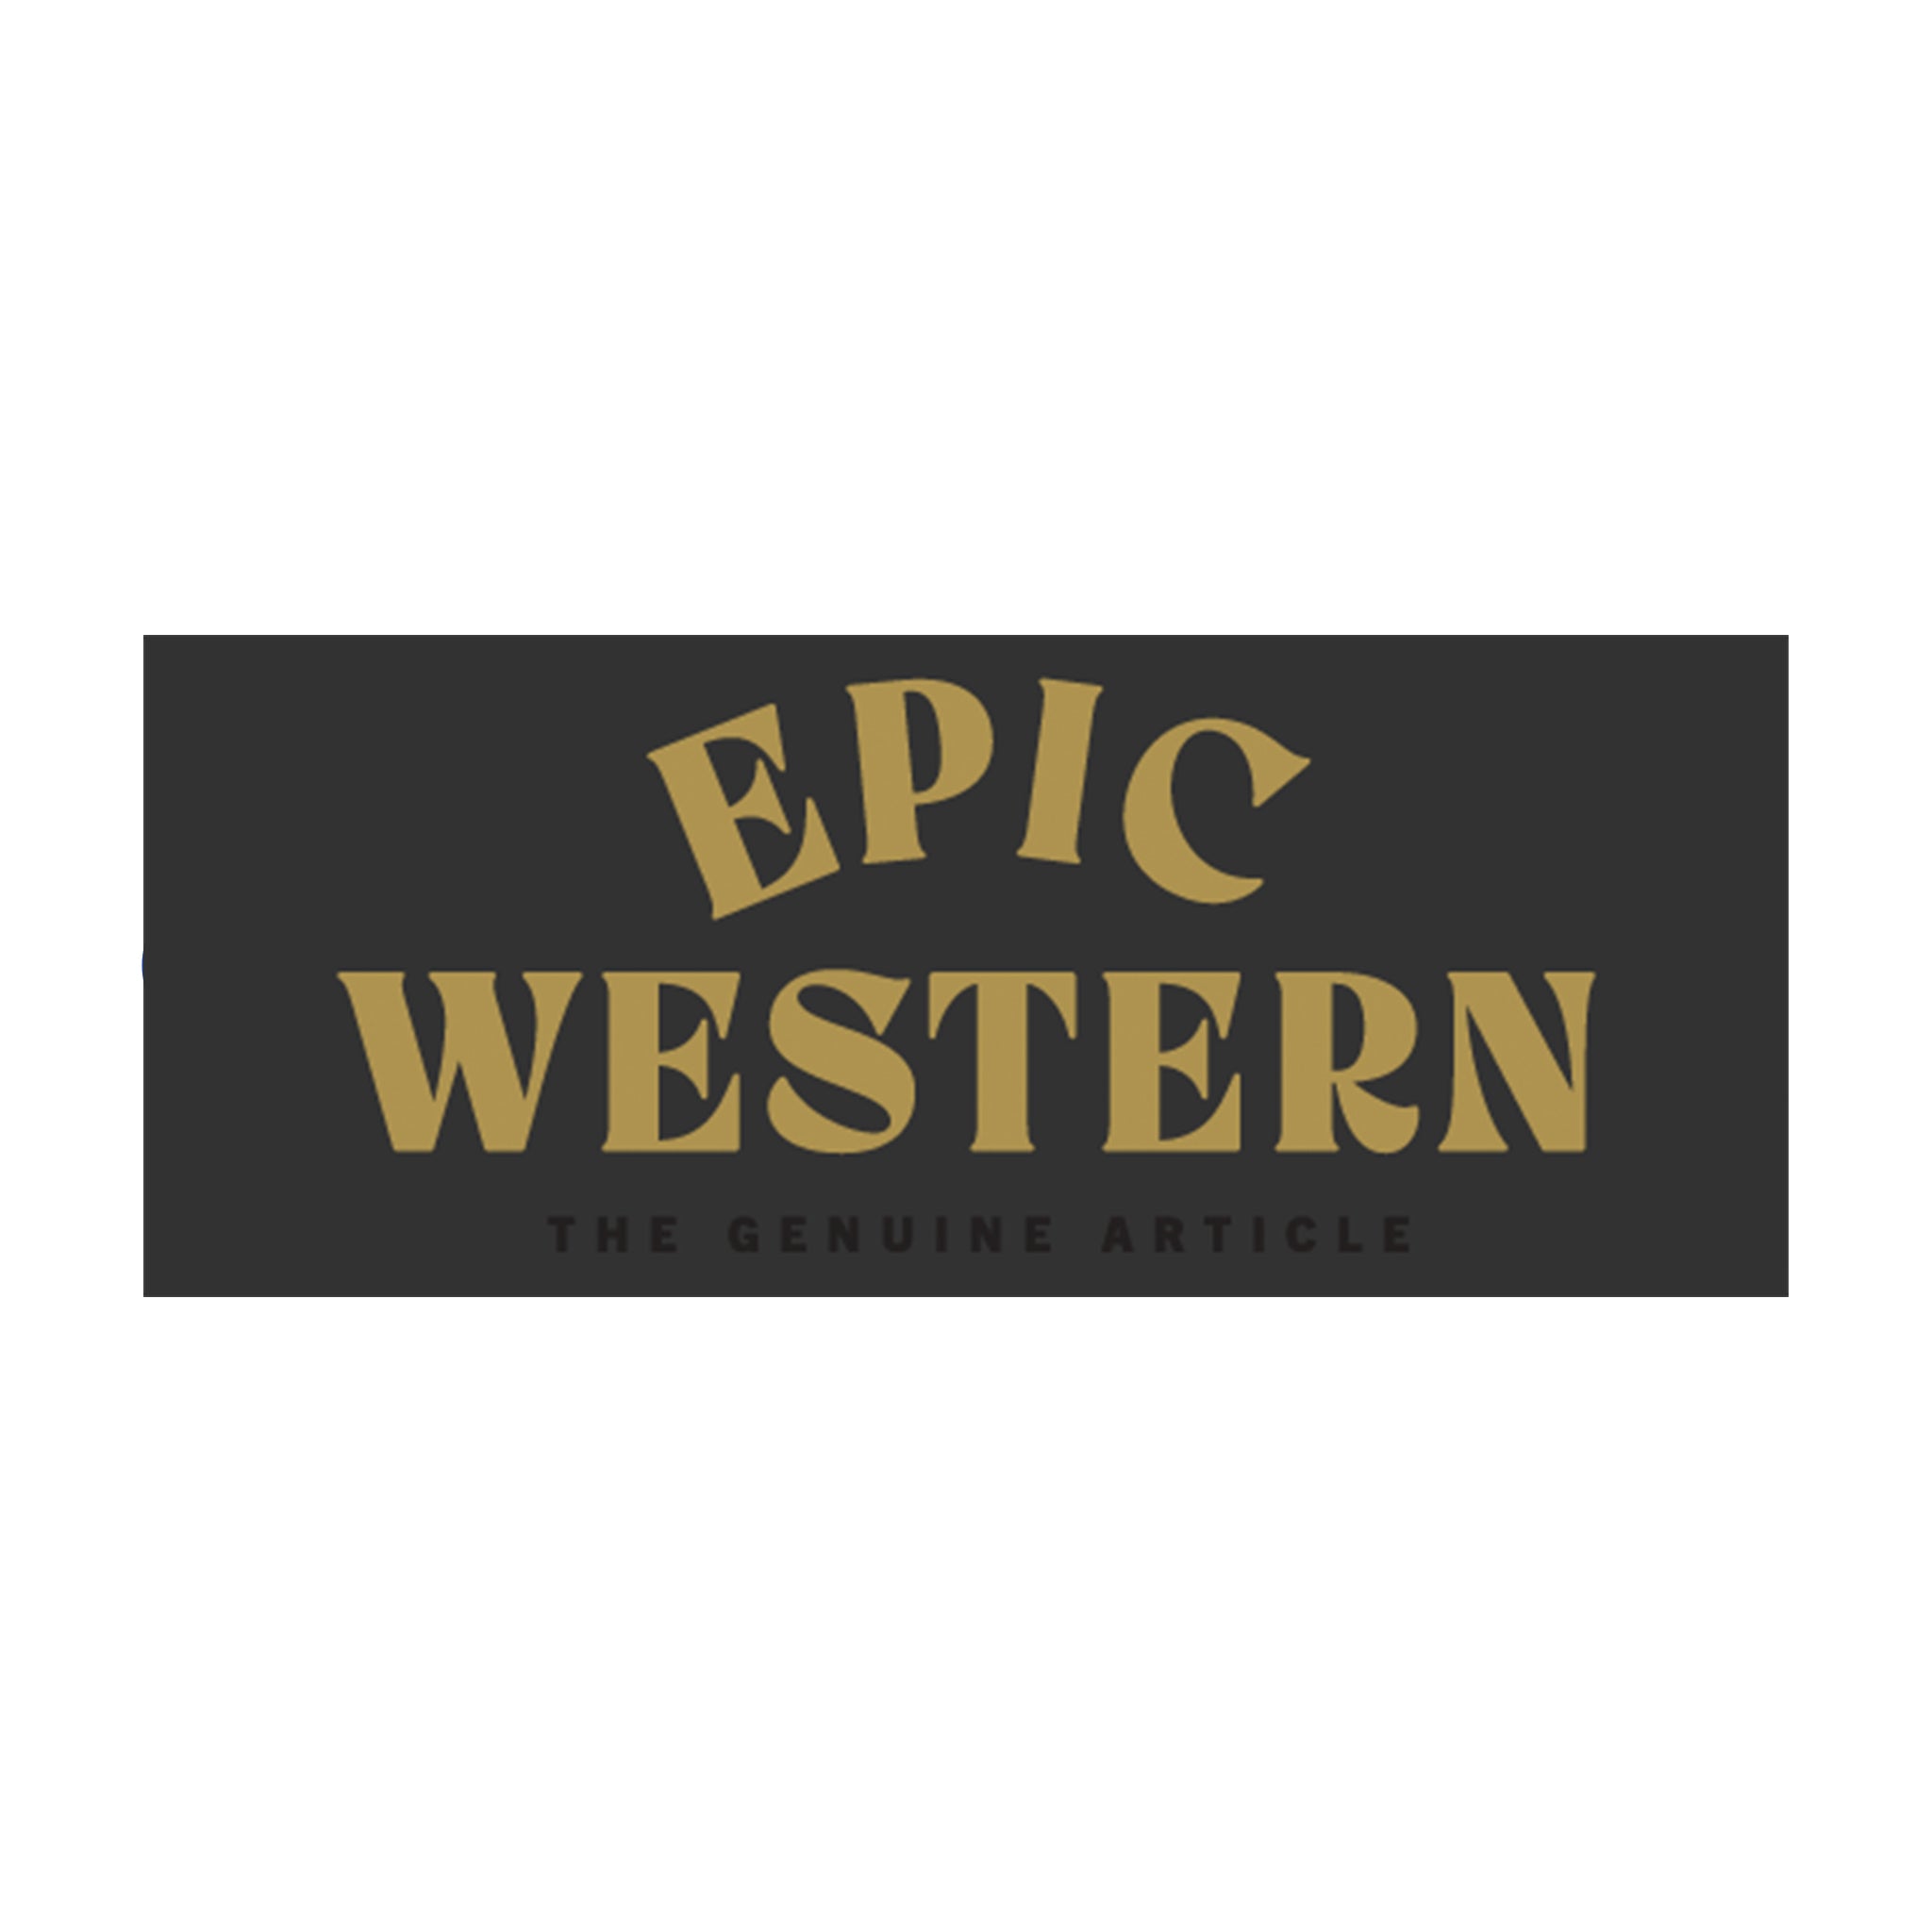 EpicWest